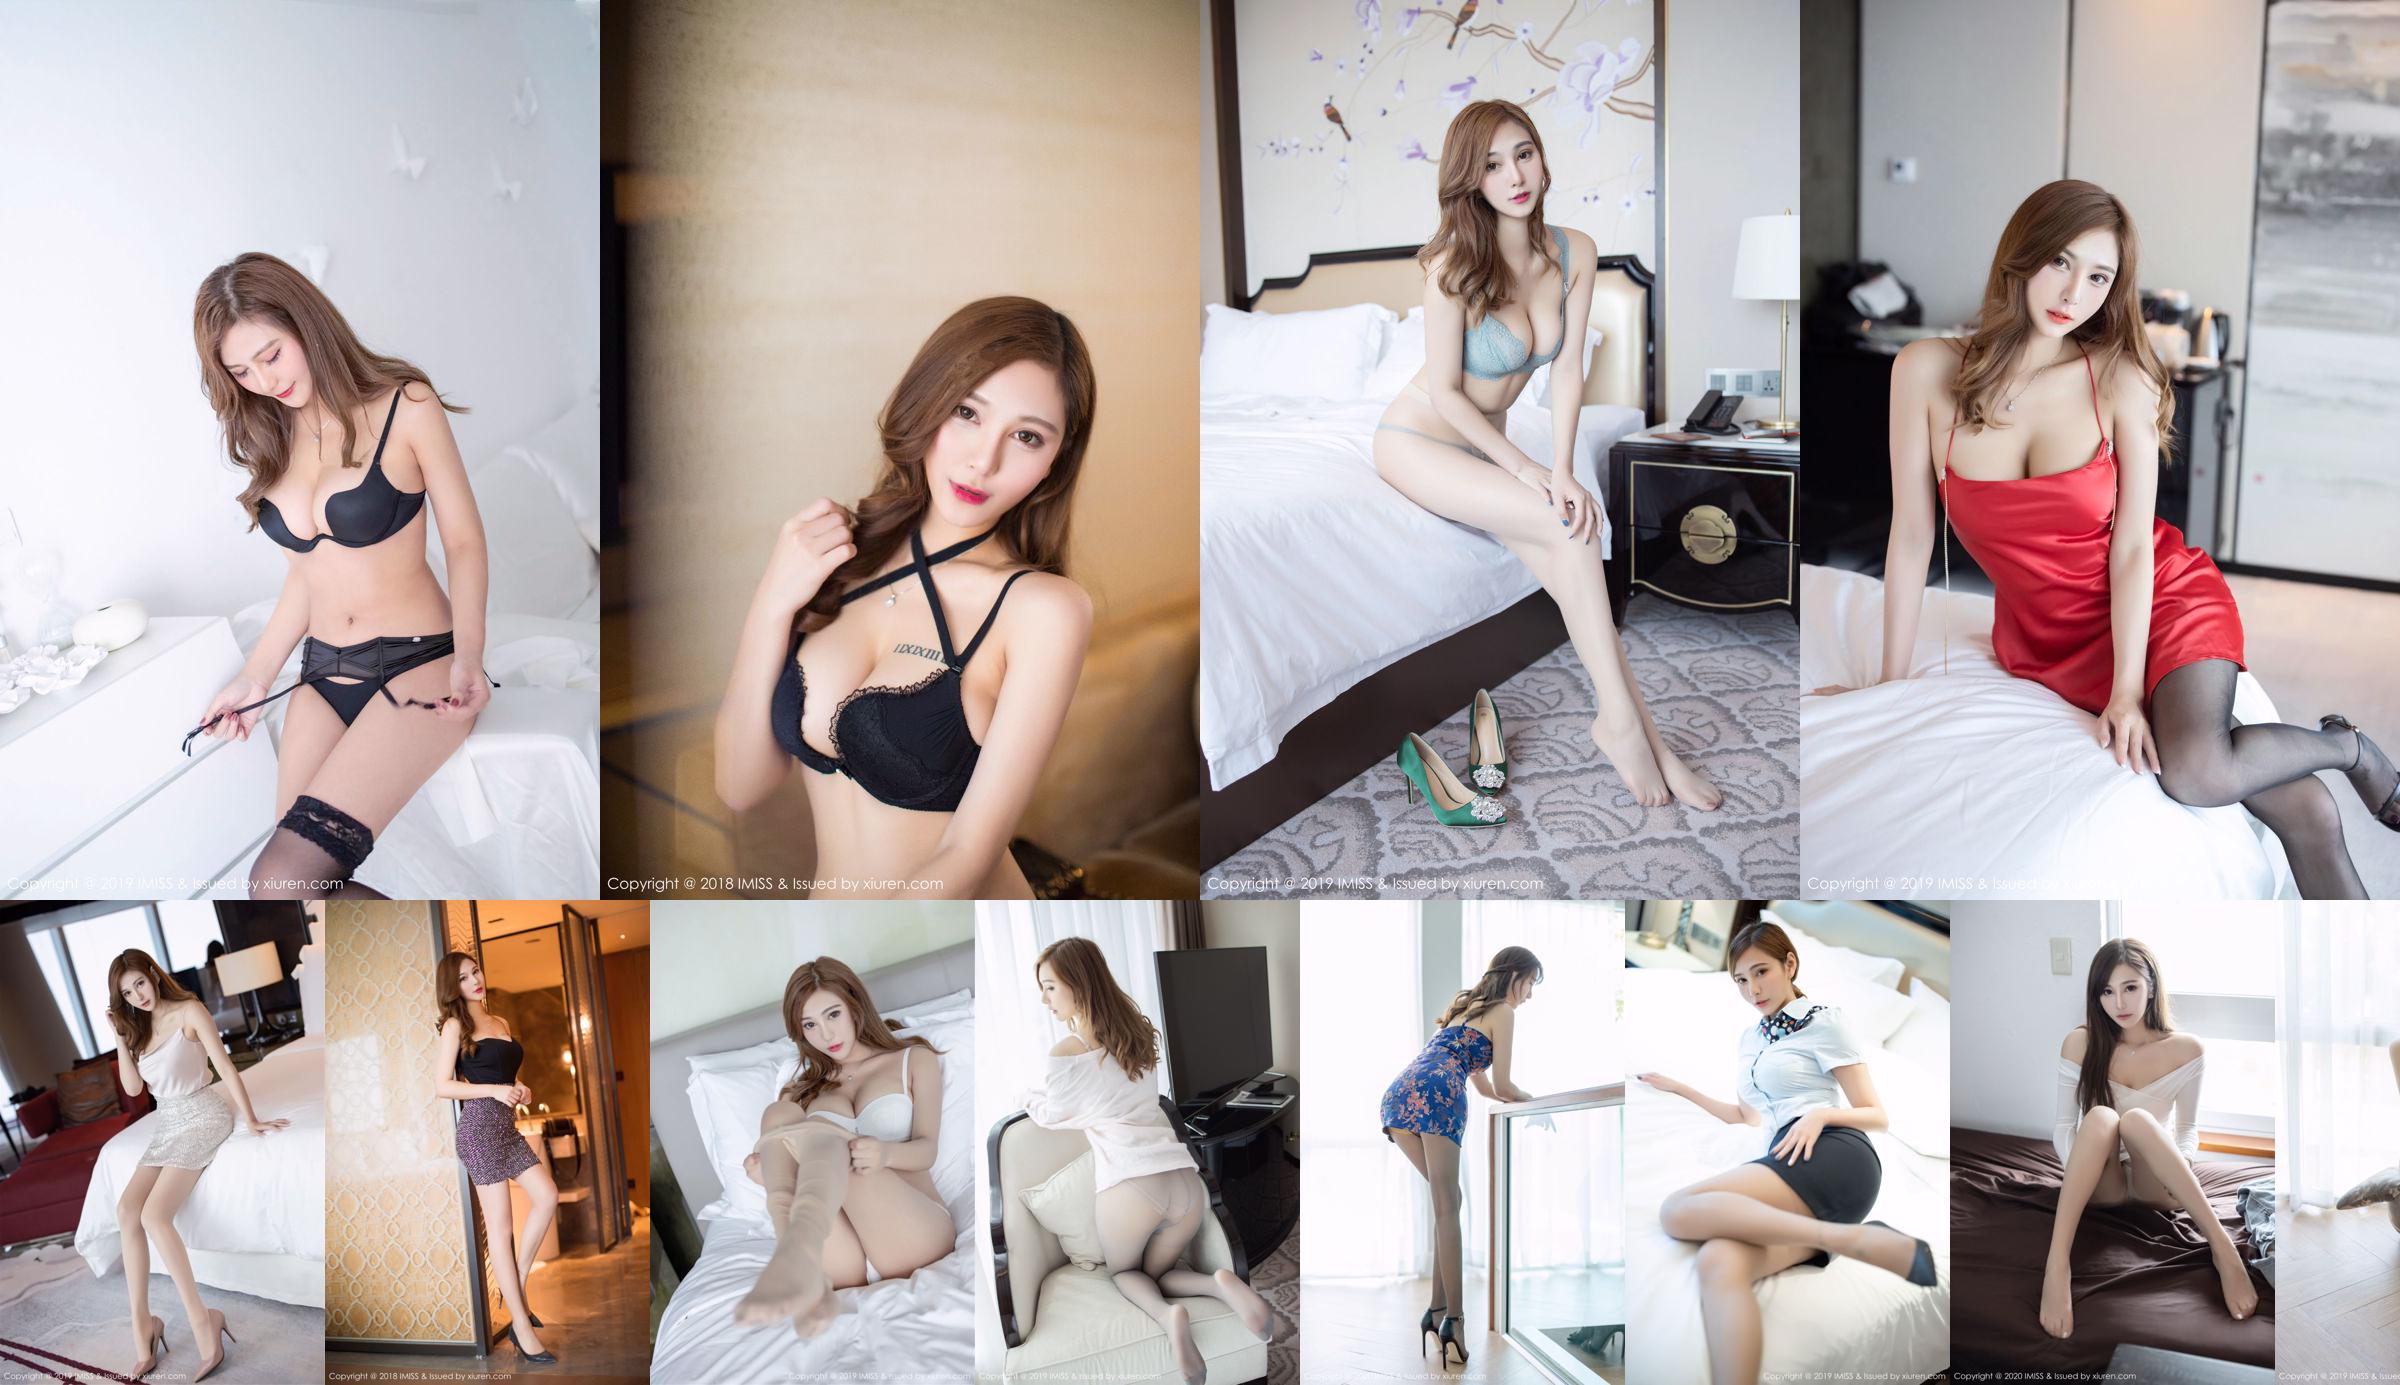 [I Miss] Vol.460 Lavinia Flesh "Special Collection of Beautiful Legs in Stockings" No.de2a9d หน้า 4